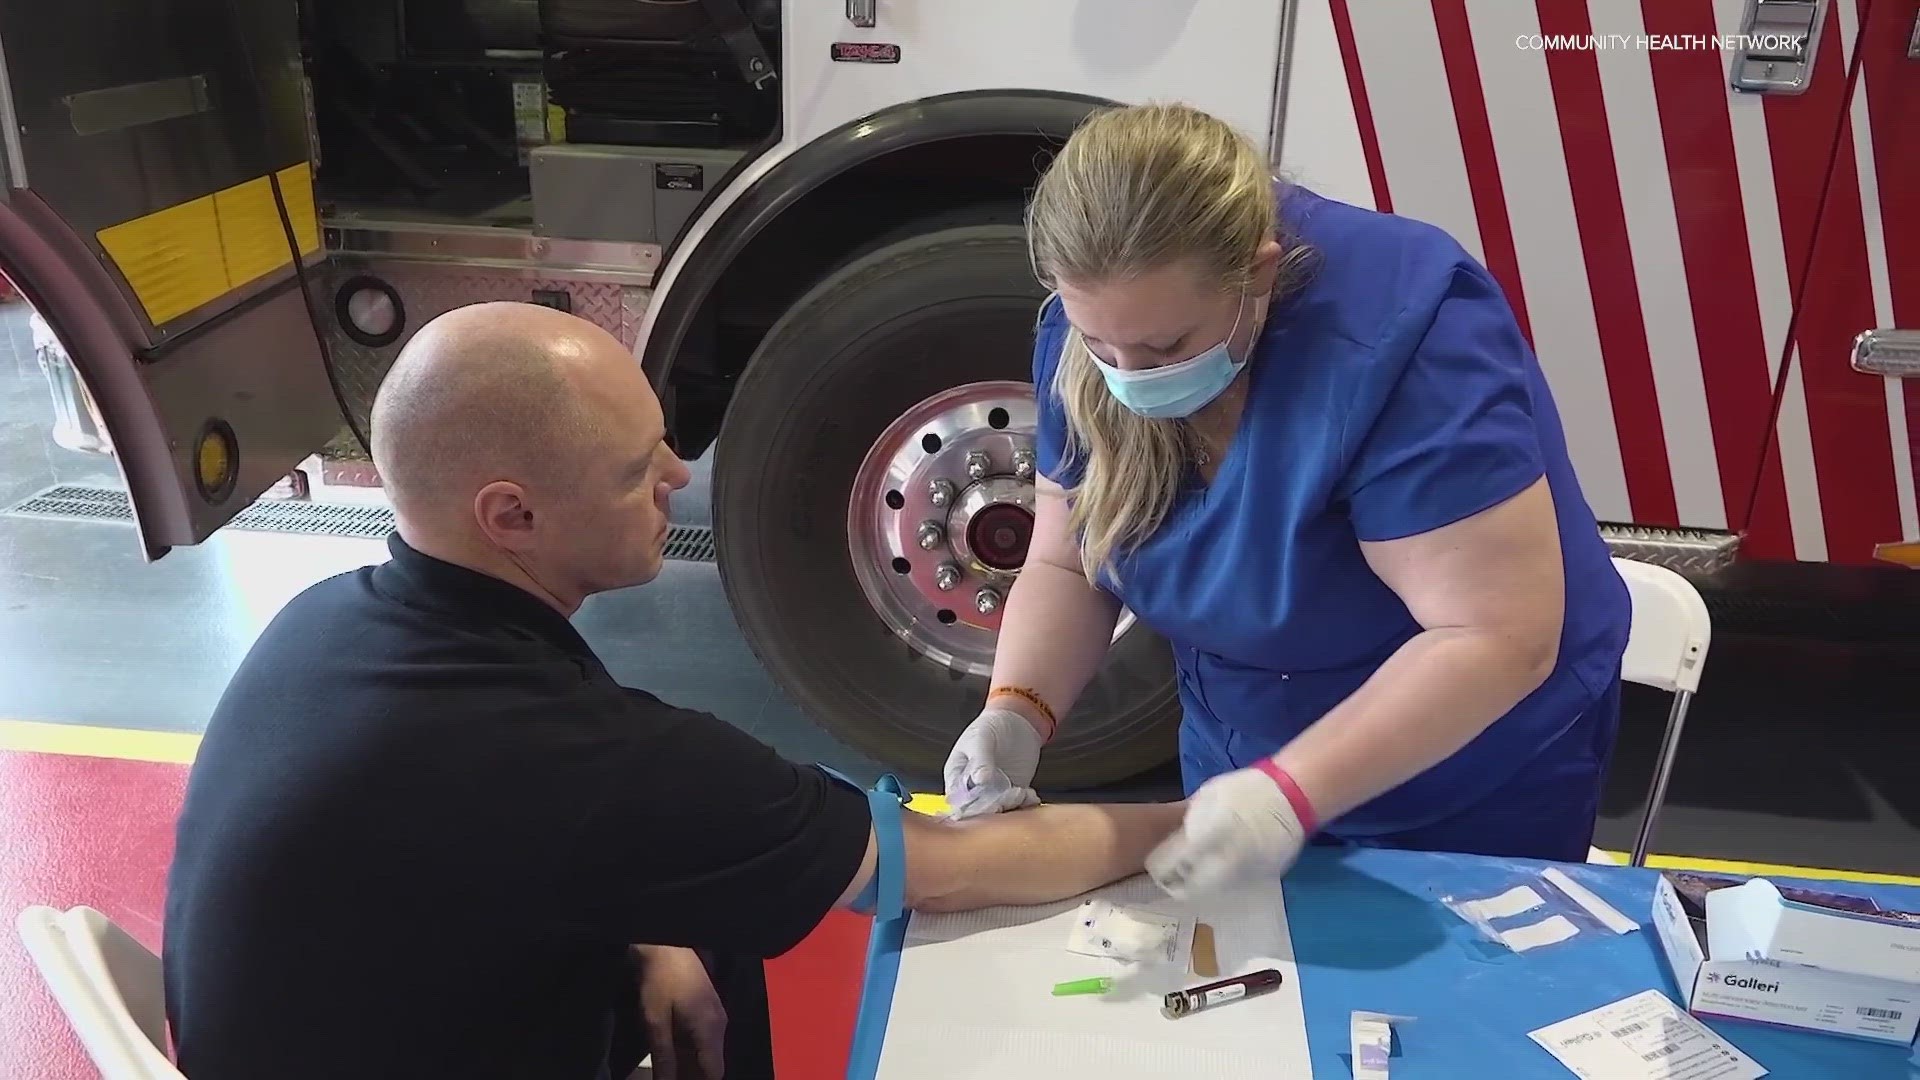 Firefighters in Fishers now have access to groundbreaking "cancer screening."